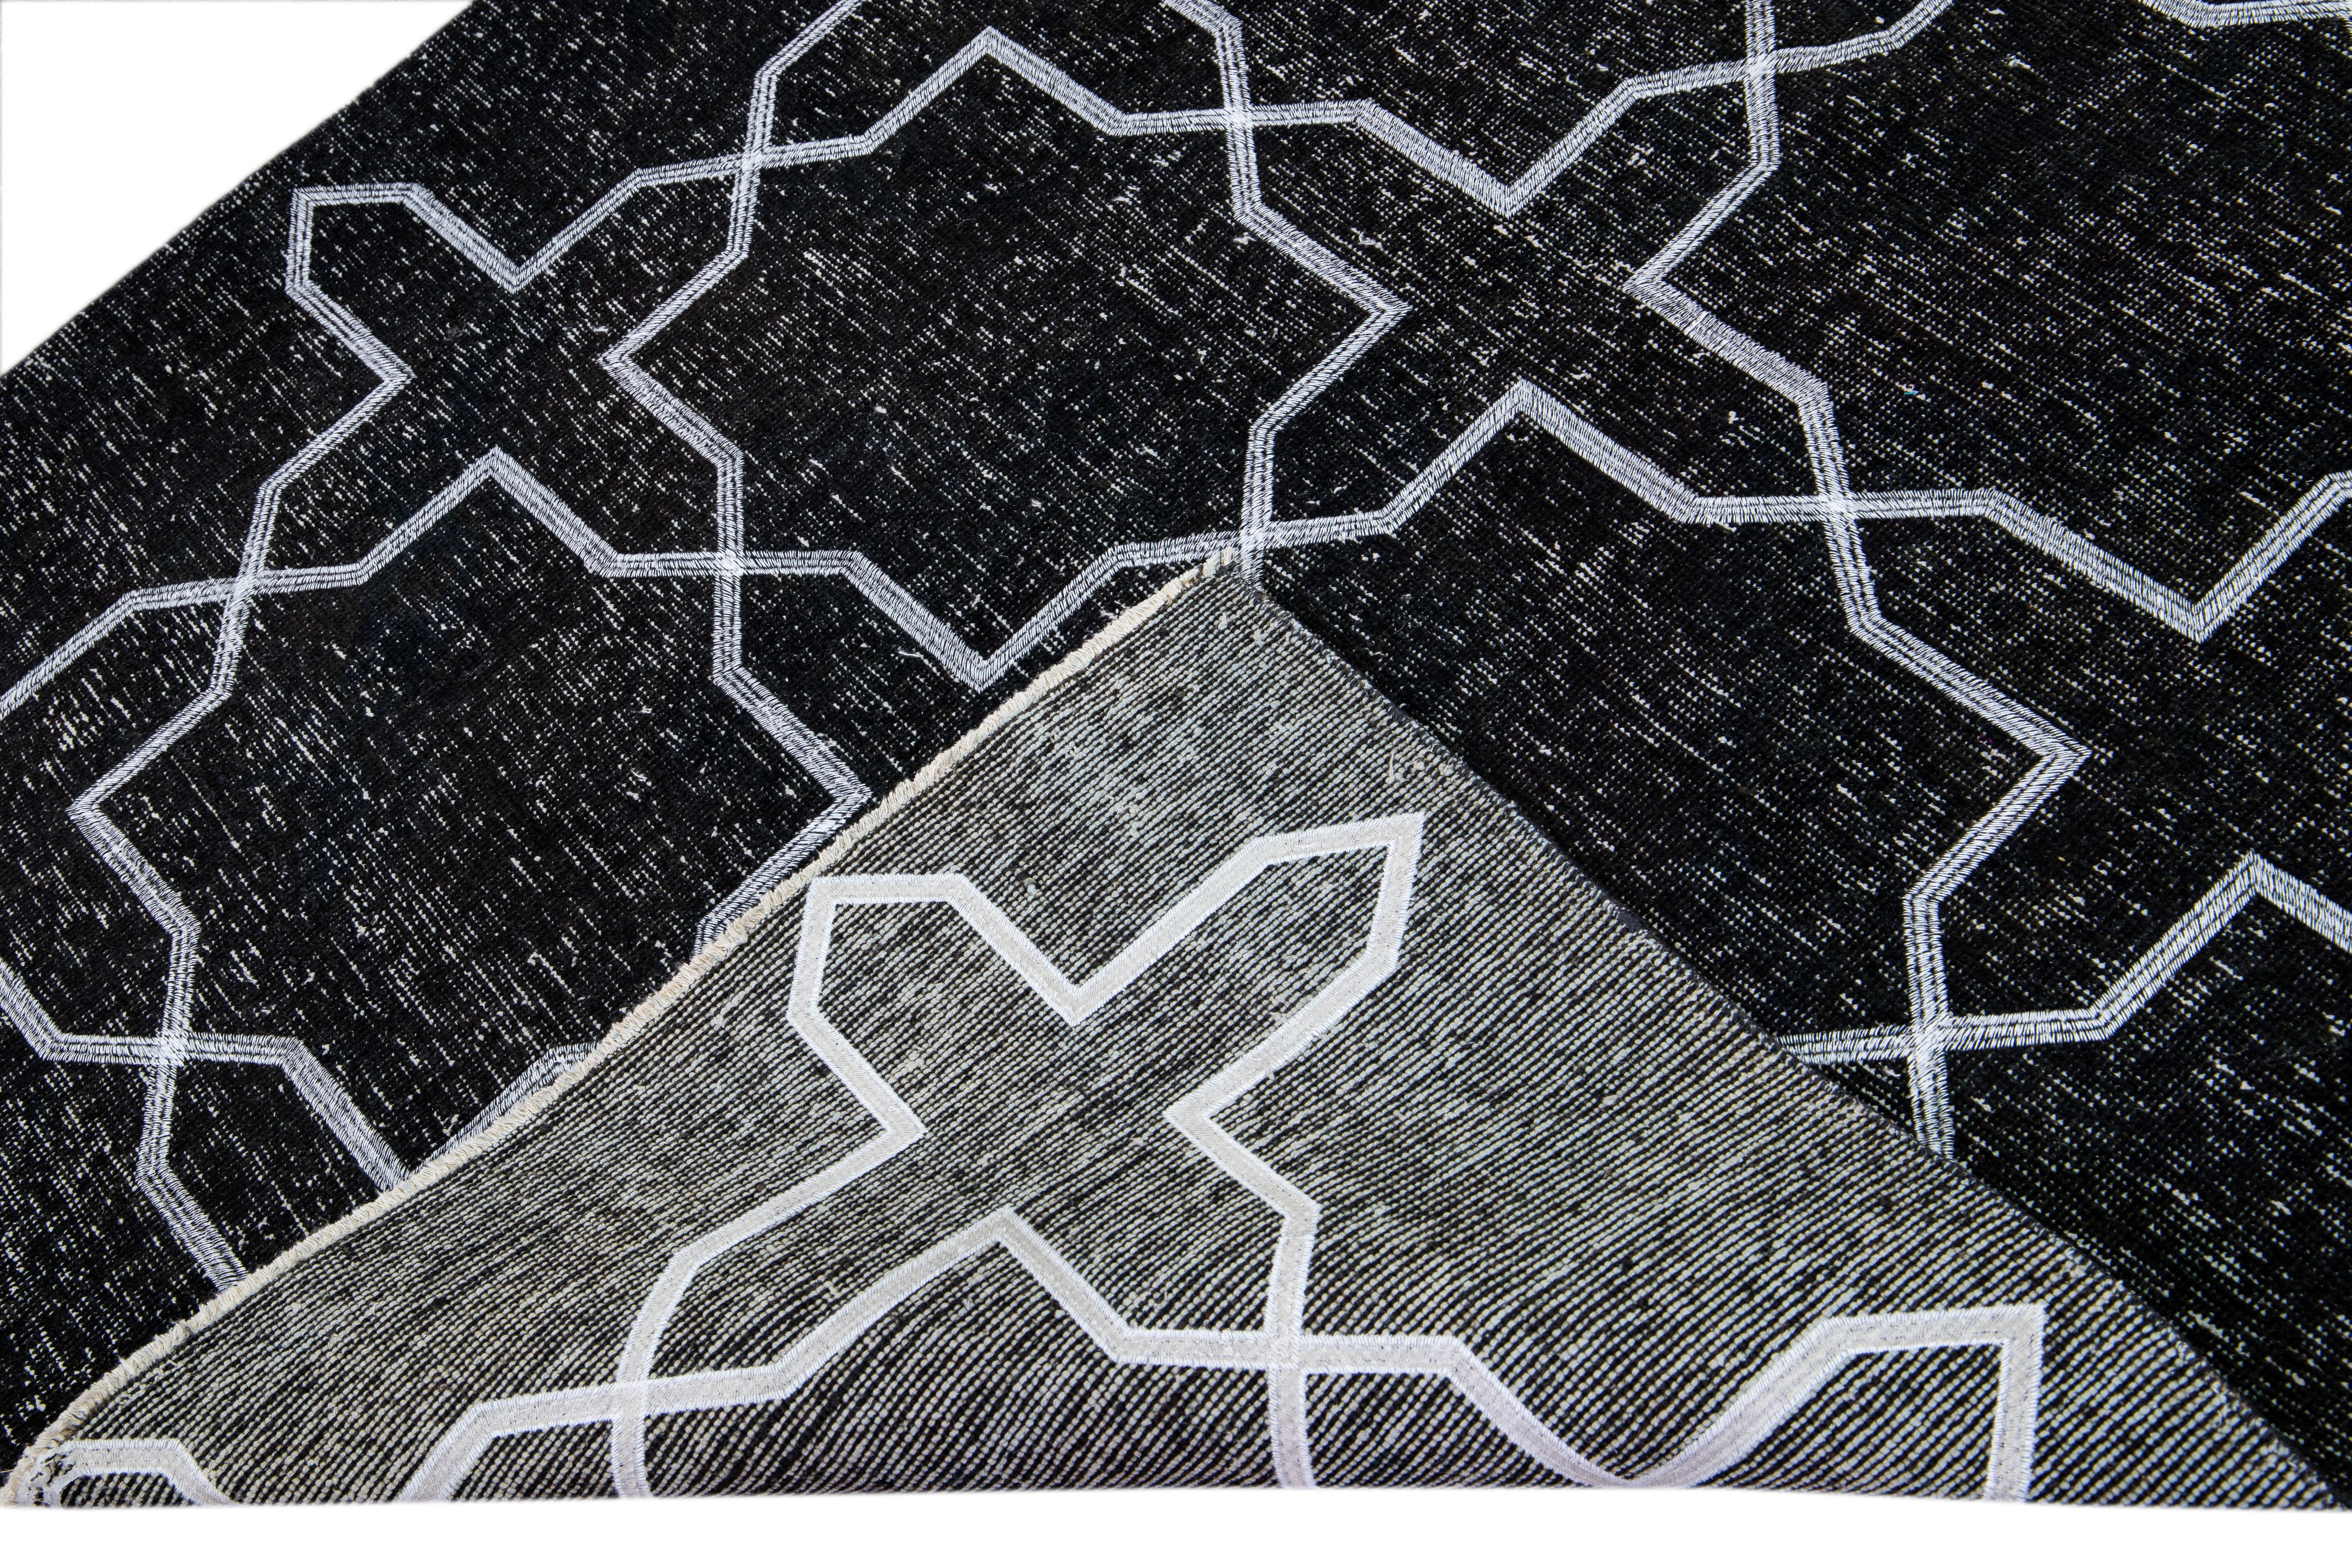 Beautiful Turkish handmade wool rug with a black distress look field. This Modern rug has white accents featuring a gorgeous all-over geometric pattern design.

This rug measures: 4'10